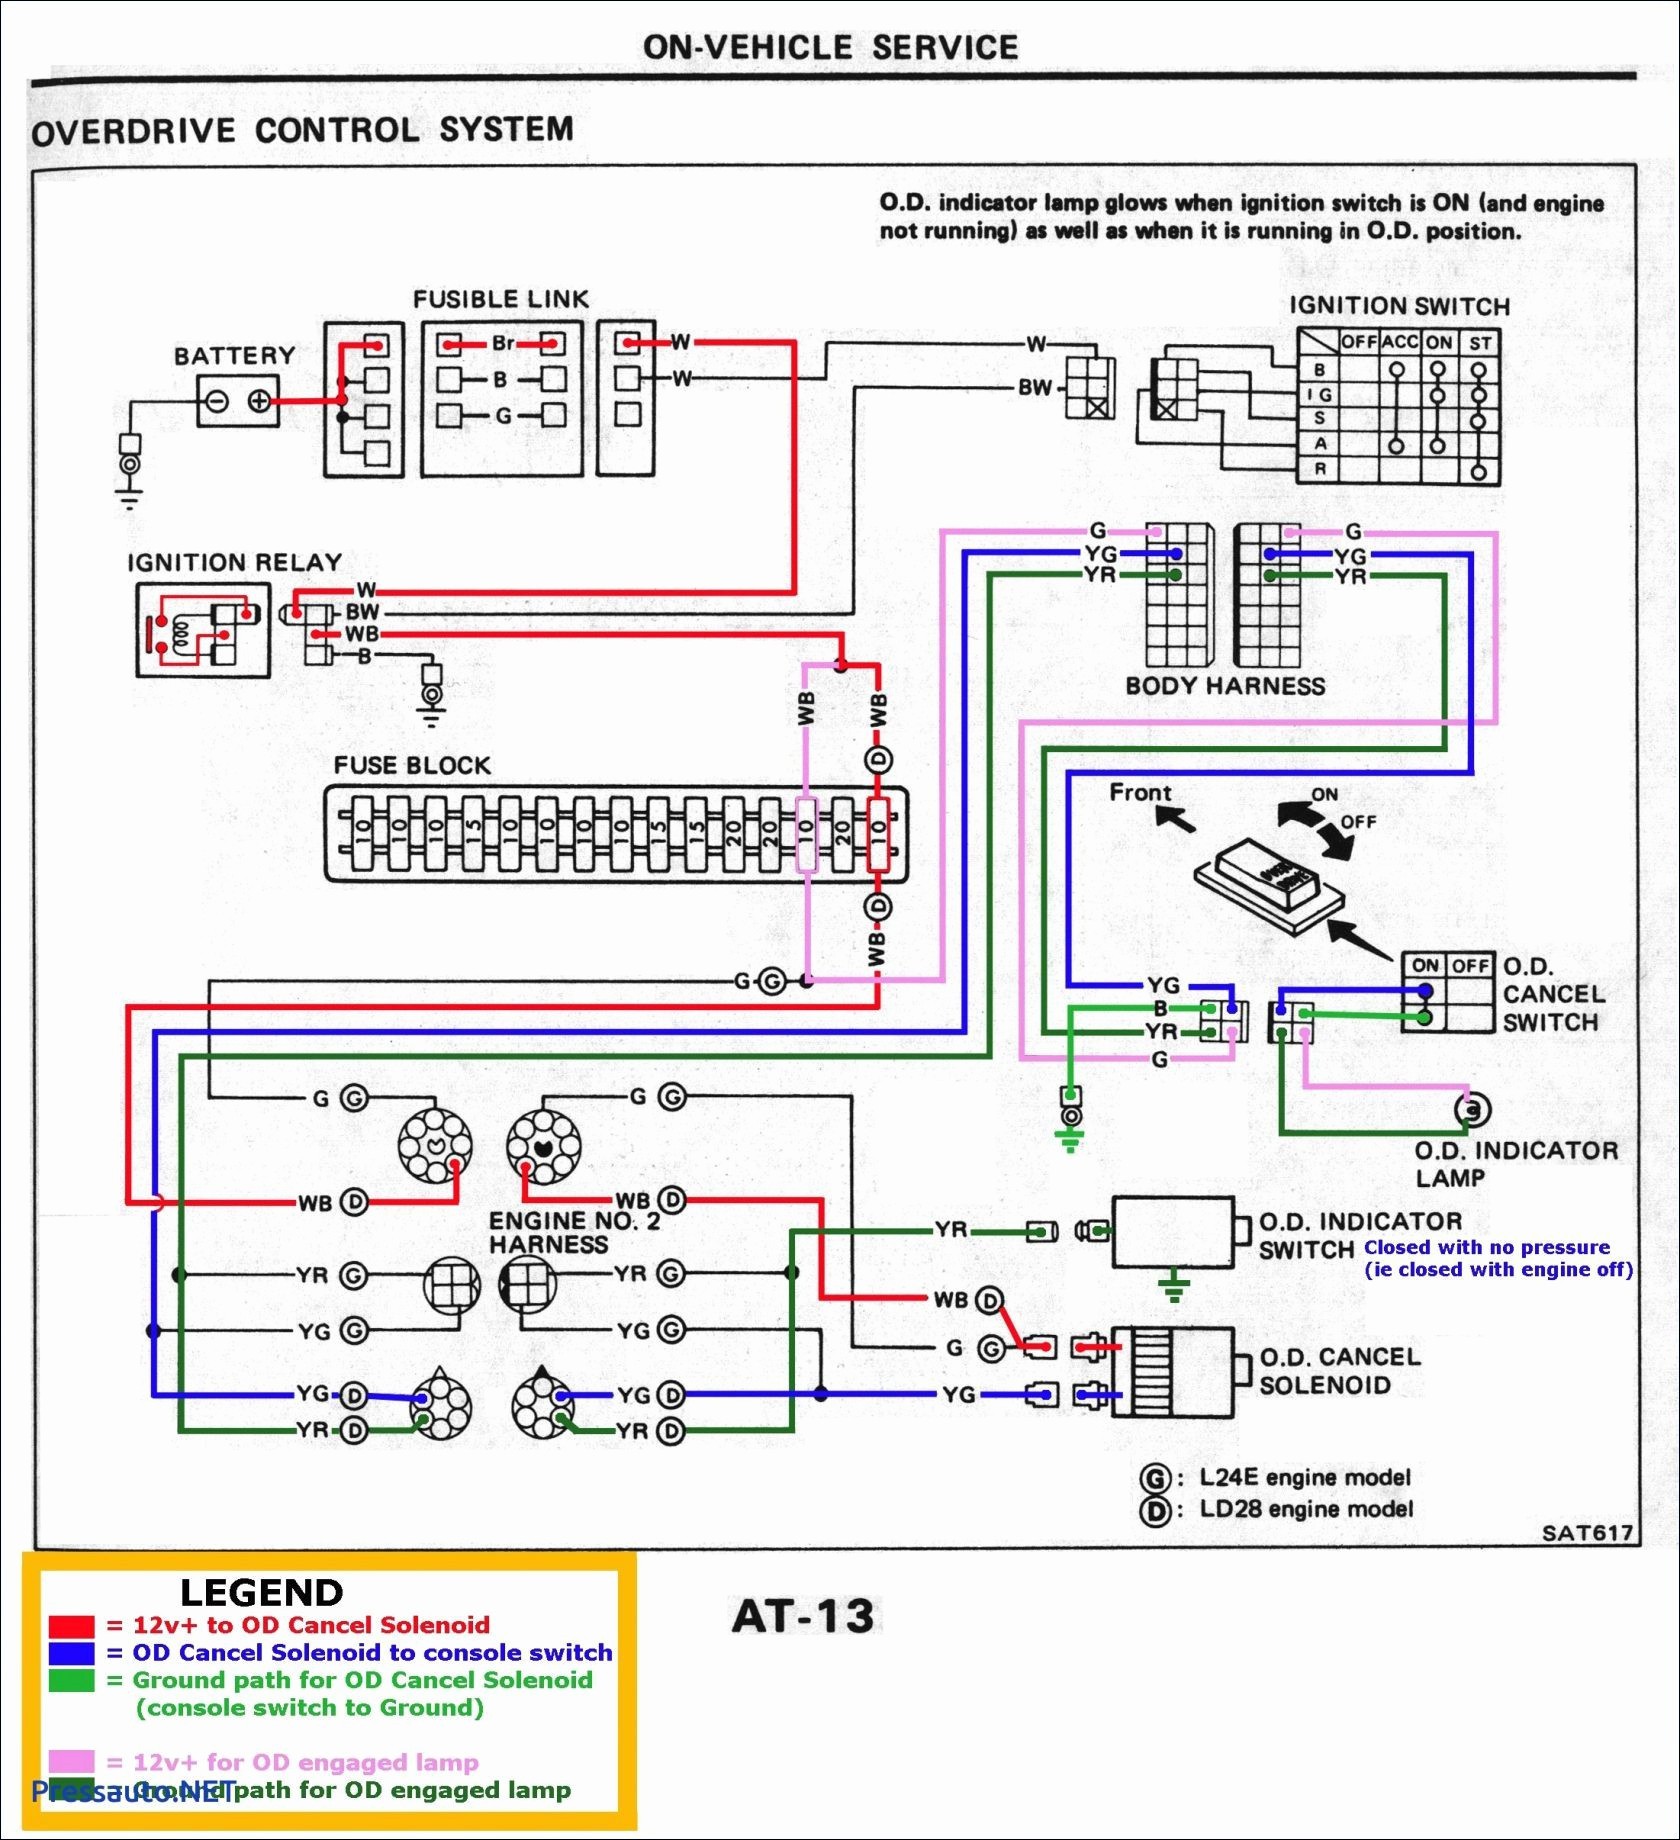 Wiring Diagram For A New Light Fixture Simple Fluro Light Wiring Diagram Australia Inspirationa 50 Luxury Wiring A